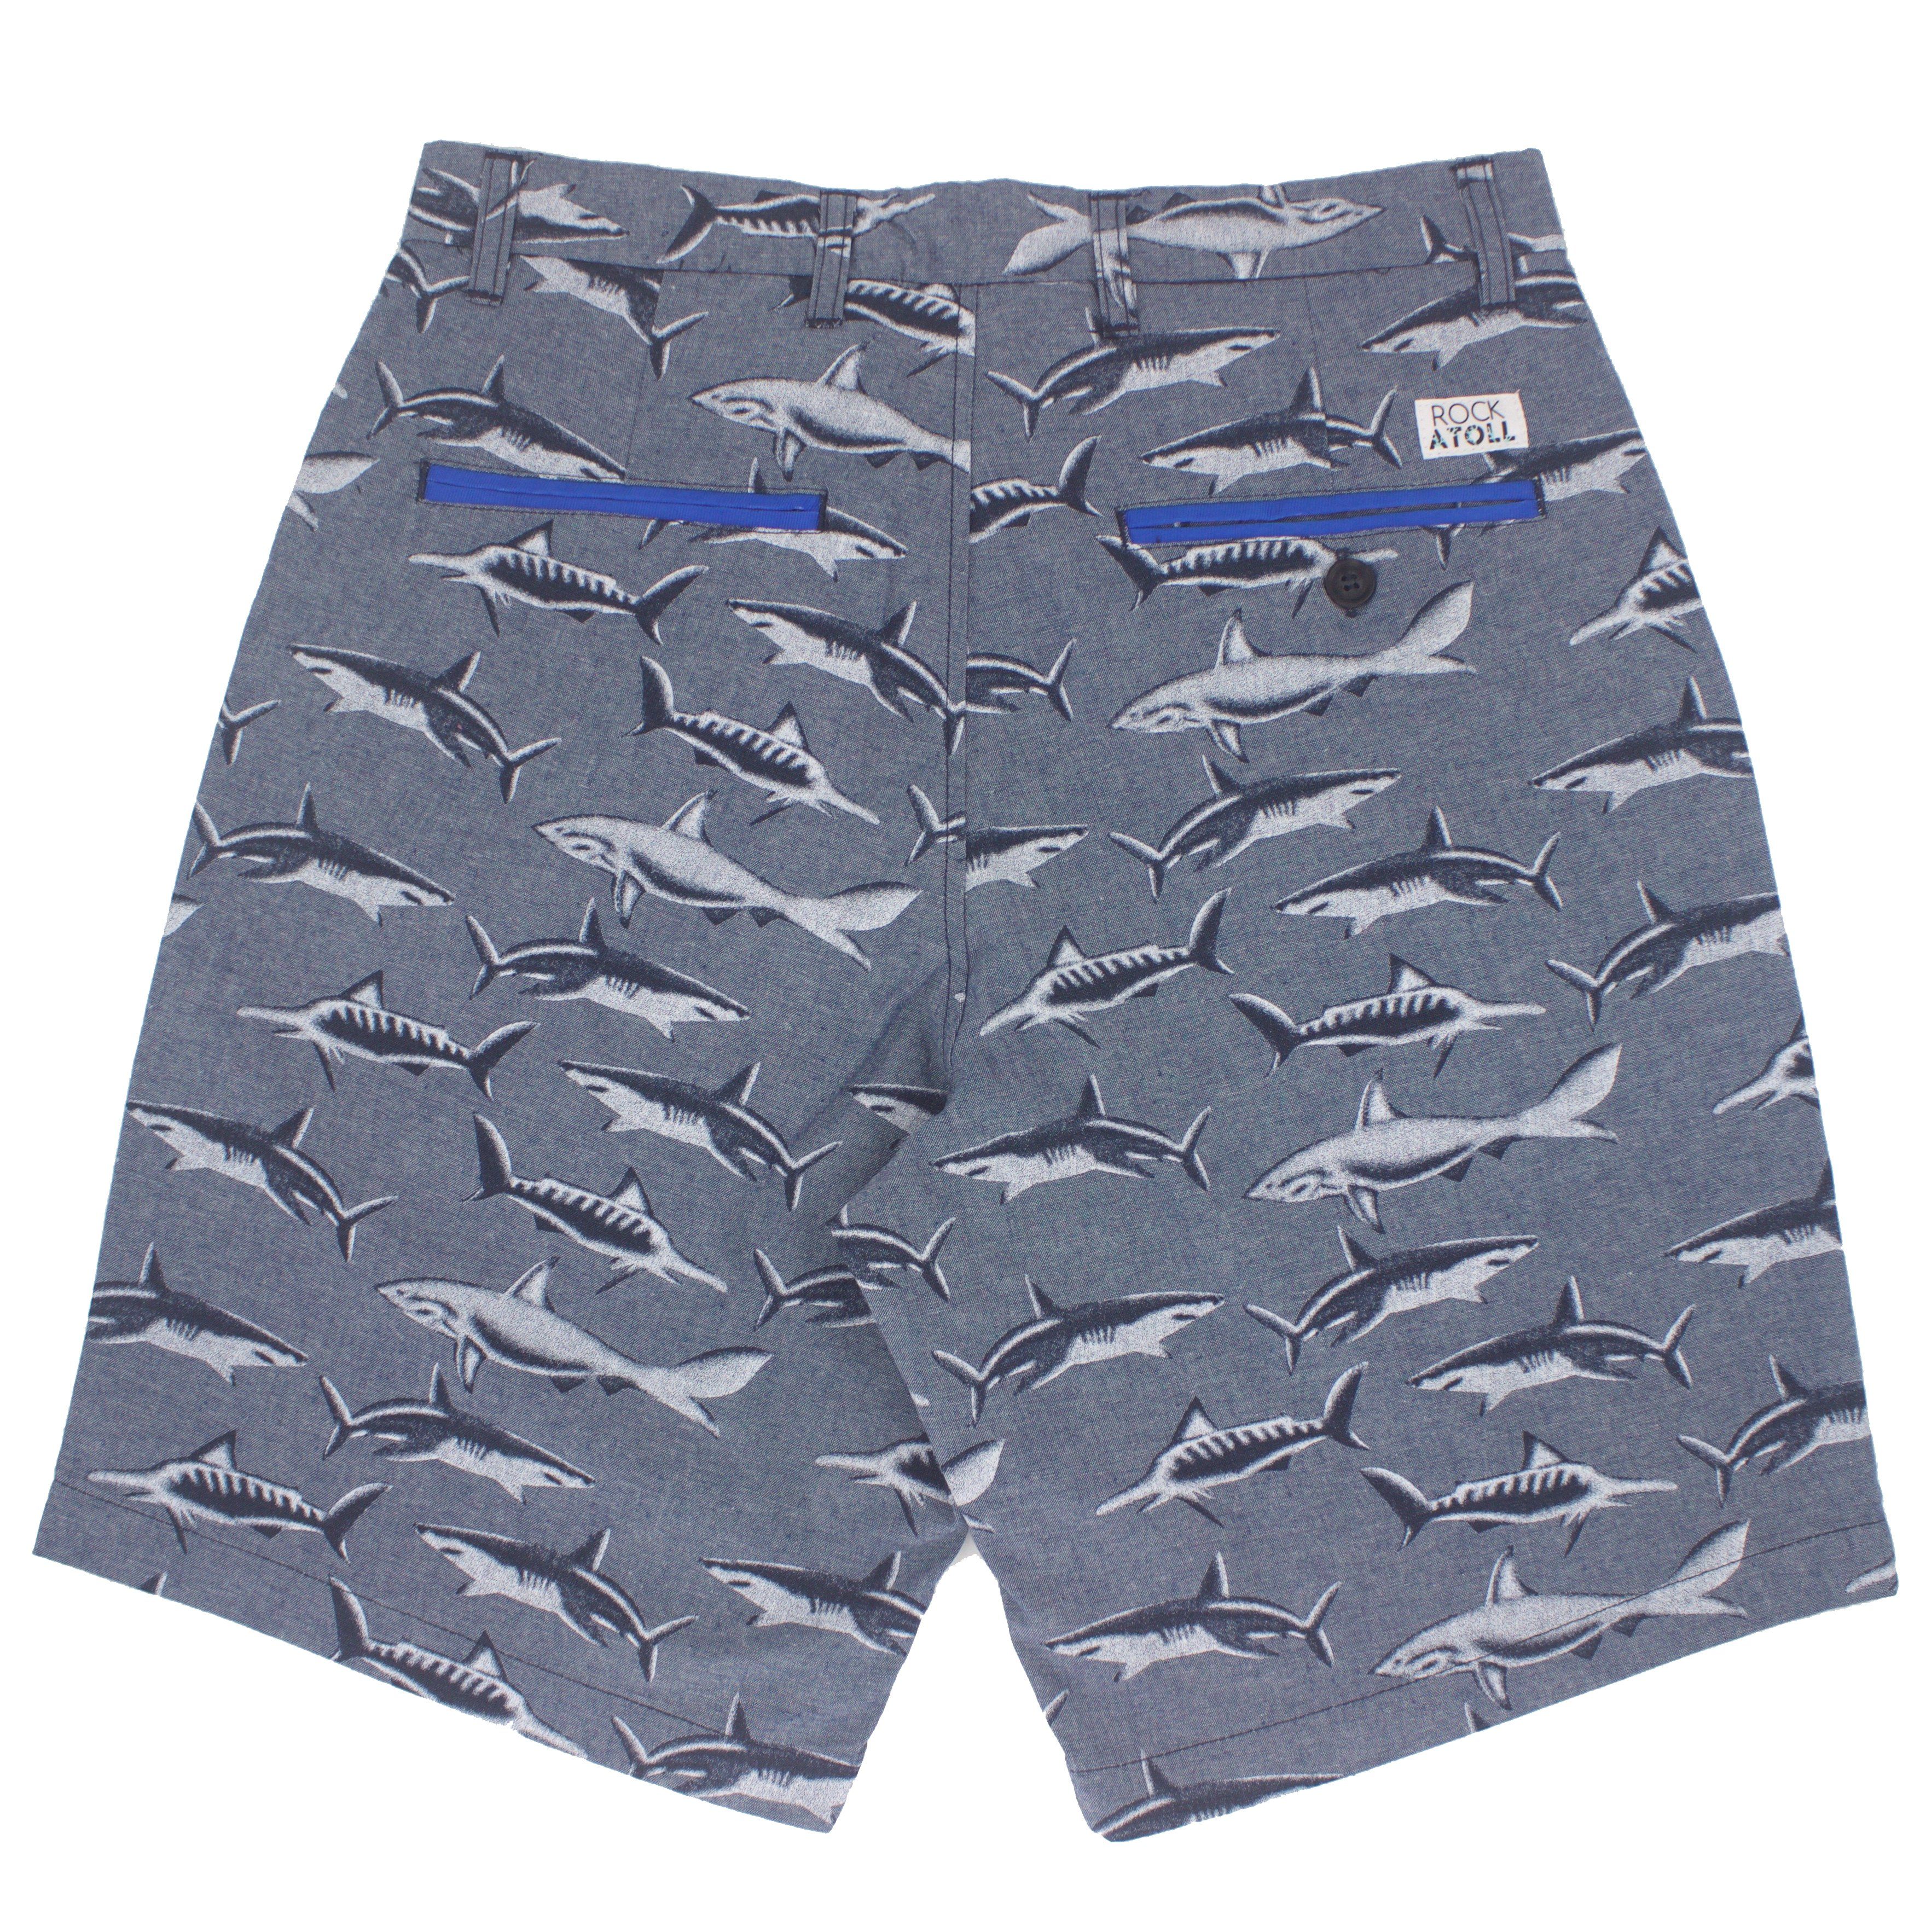 Sharks and Fishes Nautical Marine Life Themed Bermuda Shorts in Blue